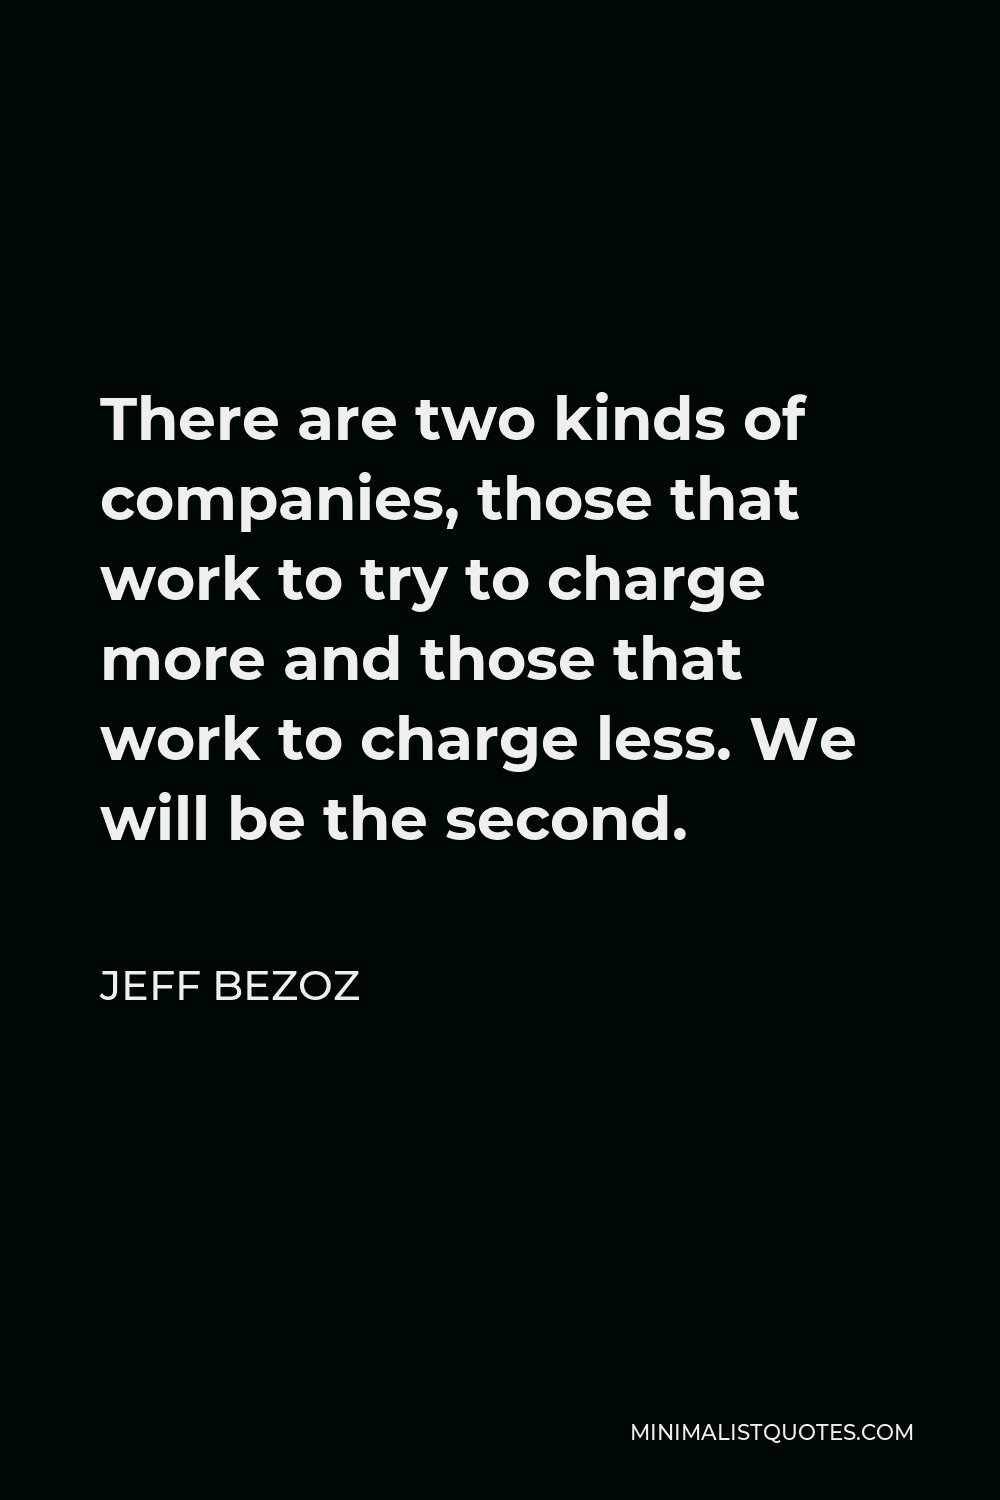 Jeff Bezoz Quote - There are two kinds of companies, those that work to try to charge more and those that work to charge less. We will be the second.